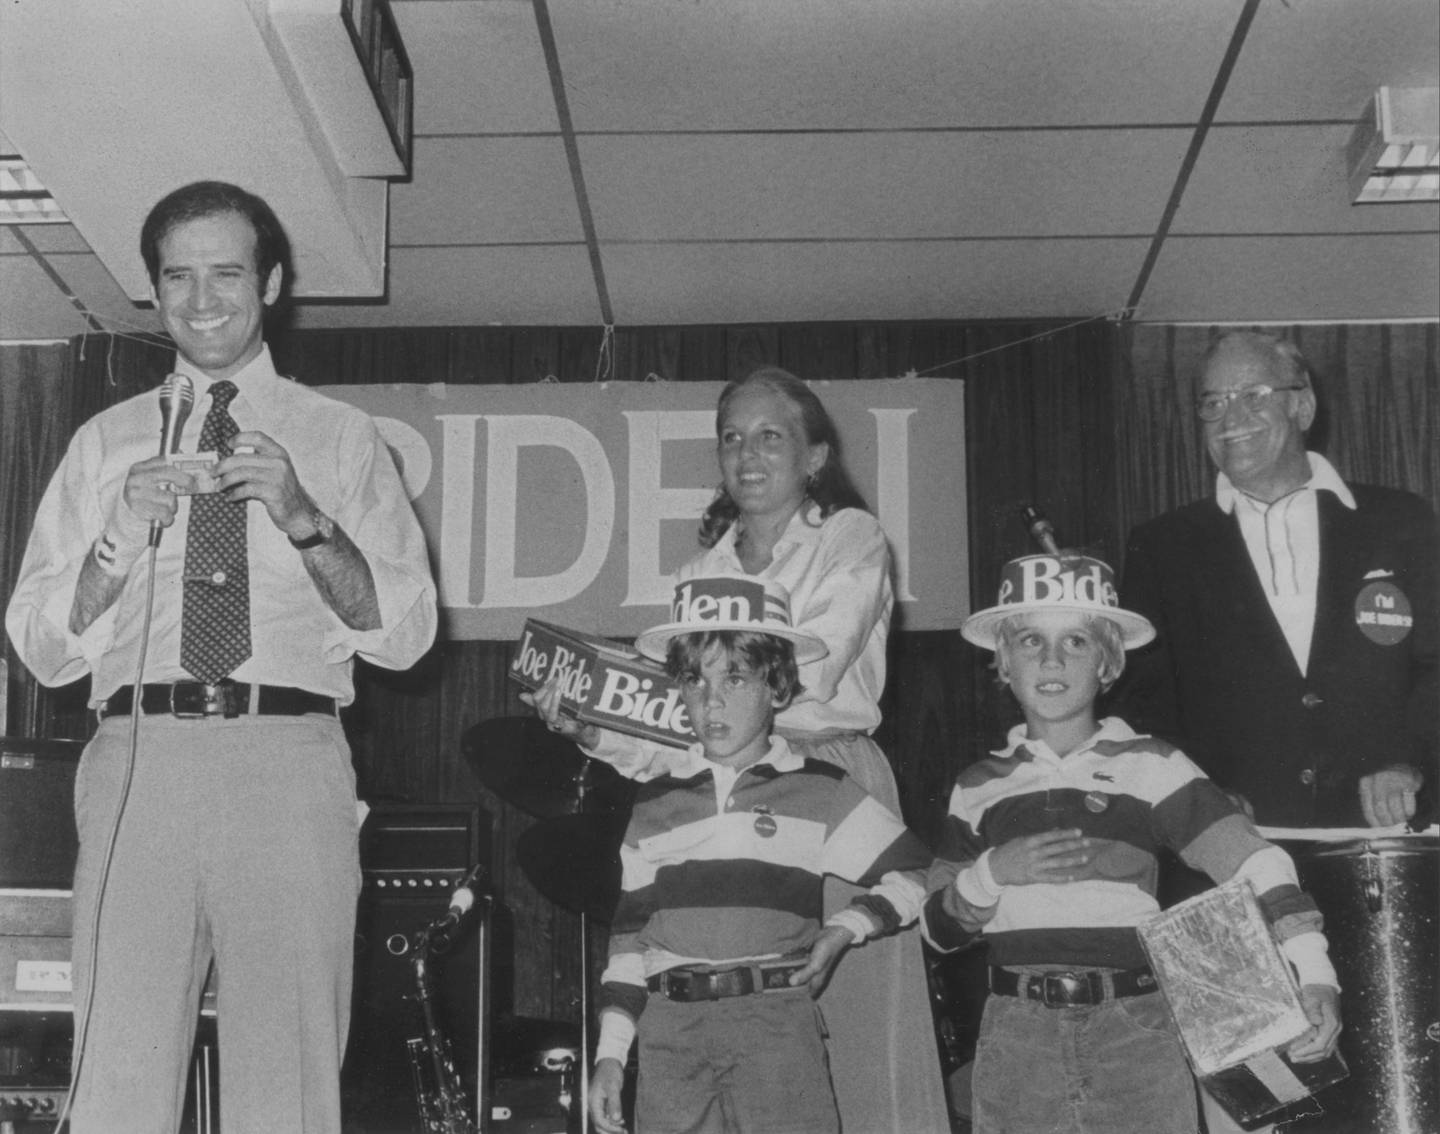 ** FILE ** In this photo provided by Sen. Biden's office, Sen. Joe Biden, D-Del., stands on stage with his wife Jill and sons, Hunter, left, and Beau, along with his father, Joe Biden Sr., during a campaign event in 1988. Biden has lived a life of second chances, a cycle that's been cruel and redemptive by turns. Now he's starting over once again. Deeply private yet in-your-face, collegial yet ideological, the Delaware senator brings a wealth of foreign policy experience to Barack Obama's Democratic ticket, plus wisdom in the ways of Washington and an infectious enthusiasm for political donnybrooks. (AP Photo/Sen. Biden's office)